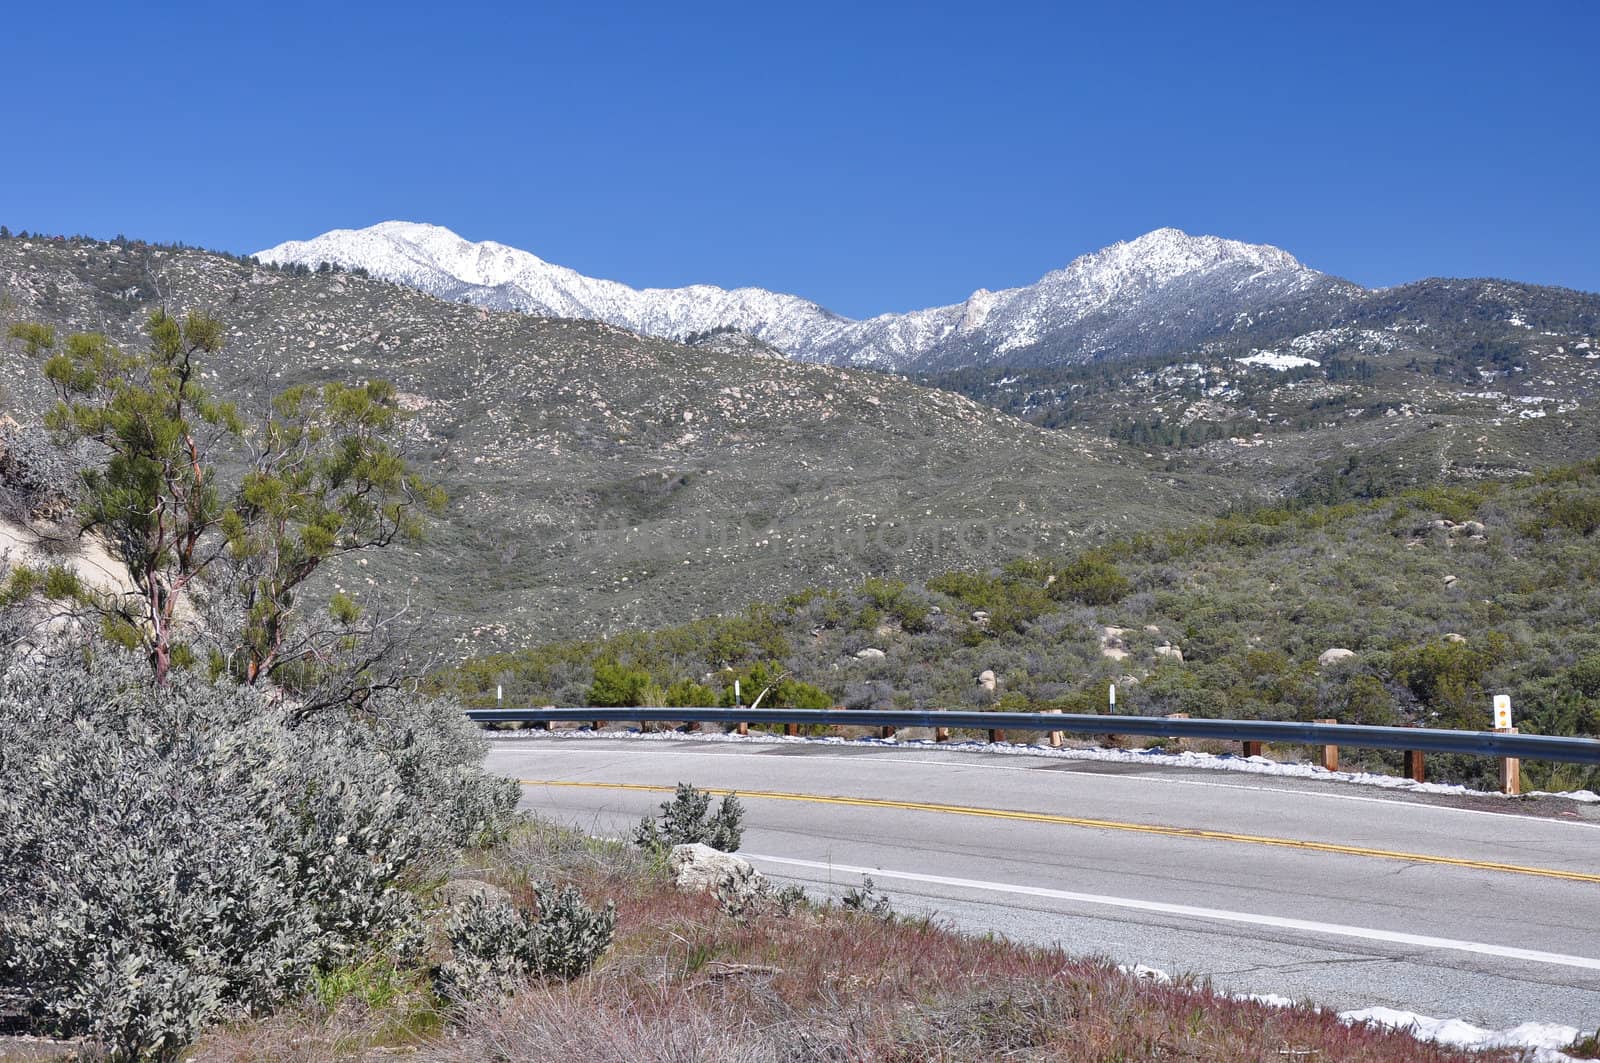 Snow-capped Mount San Jacinto is seen from Highway 74 in Southern California.